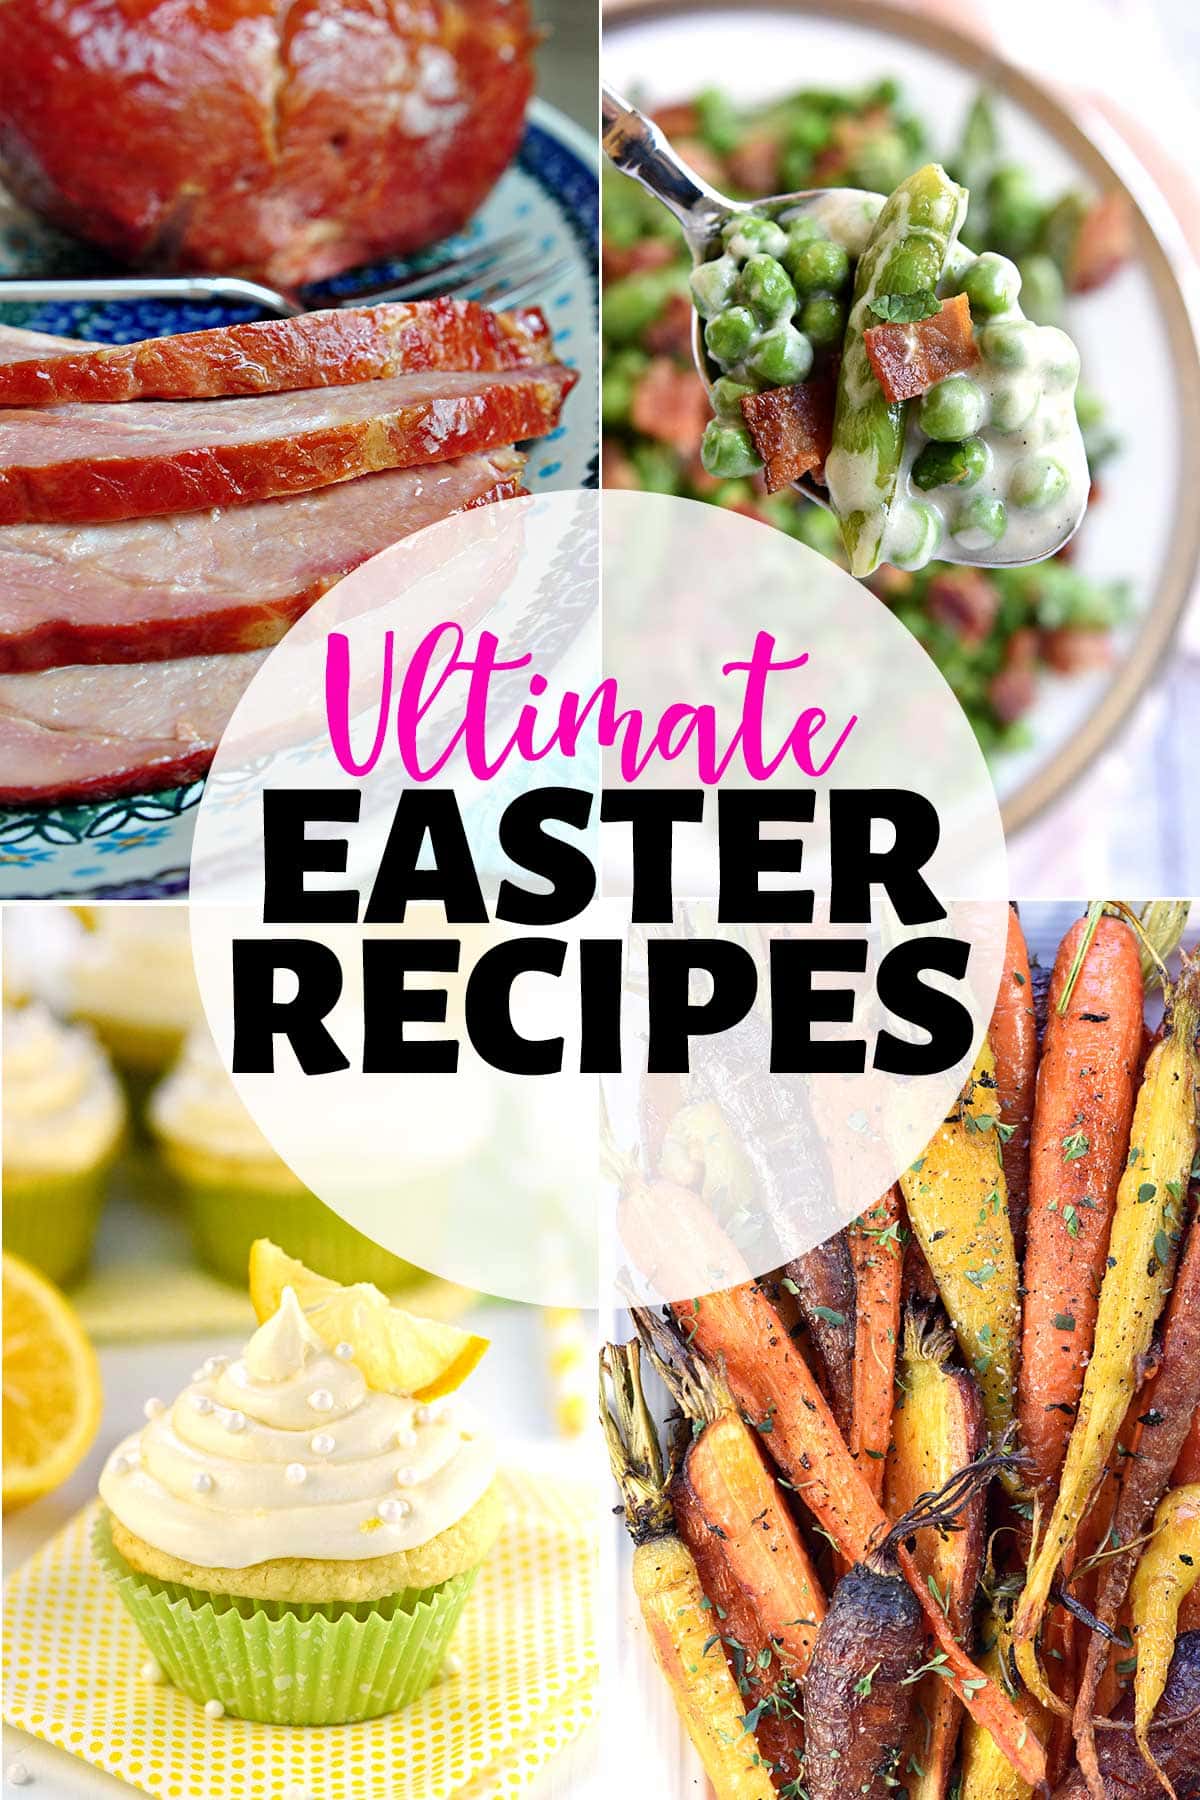 Ultimate Easter Recipes Menu Planner ~ includes everything from main dishes and side dishes, to breakfasts and desserts, to ideas for using up leftover ham and hard-boiled eggs! | FiveHeartHome.com via @fivehearthome